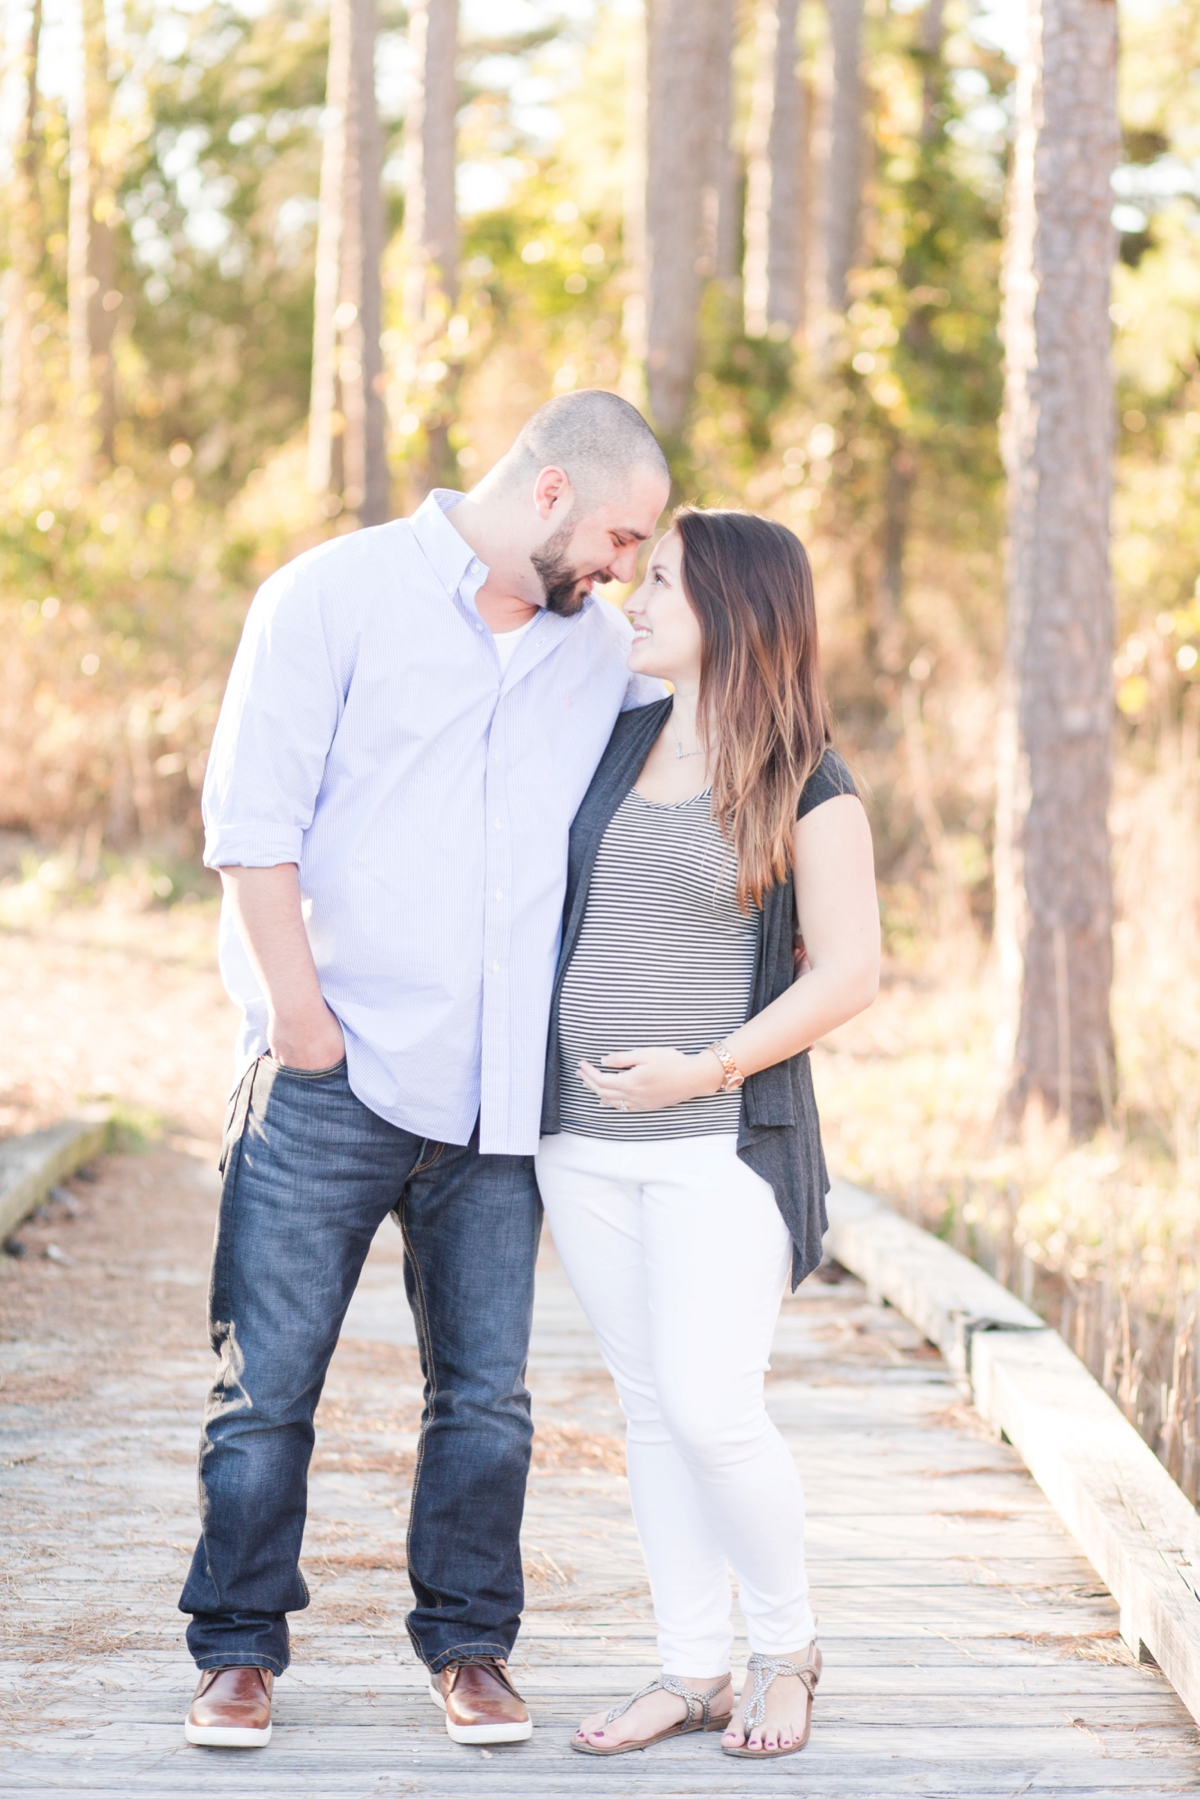 Newport News Engagement Photography by Angie McPherson Photography